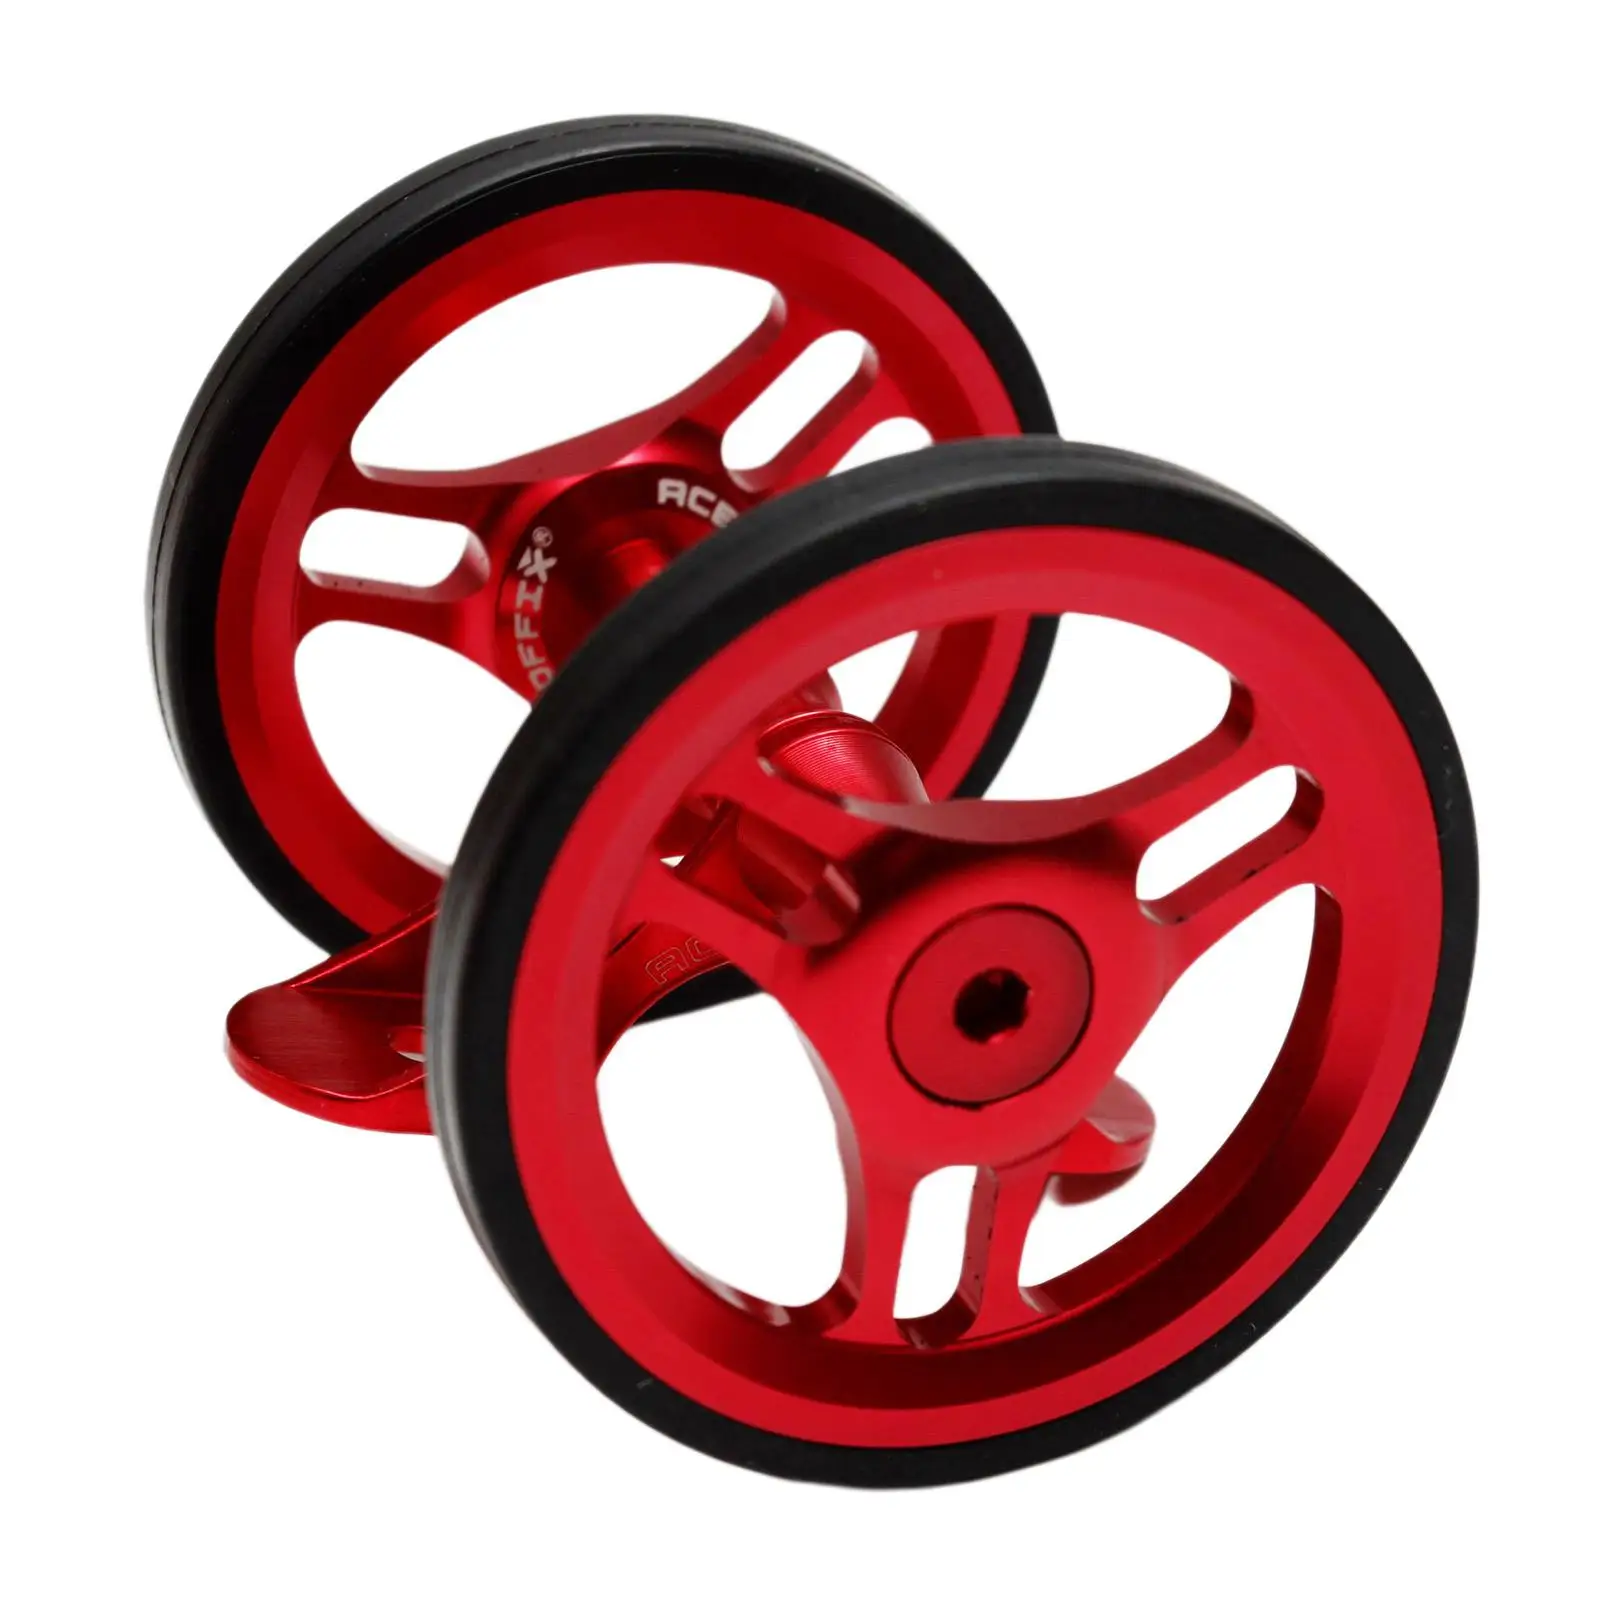 Folding Bike Accessories Diameter 60mm for Sports Outdoors